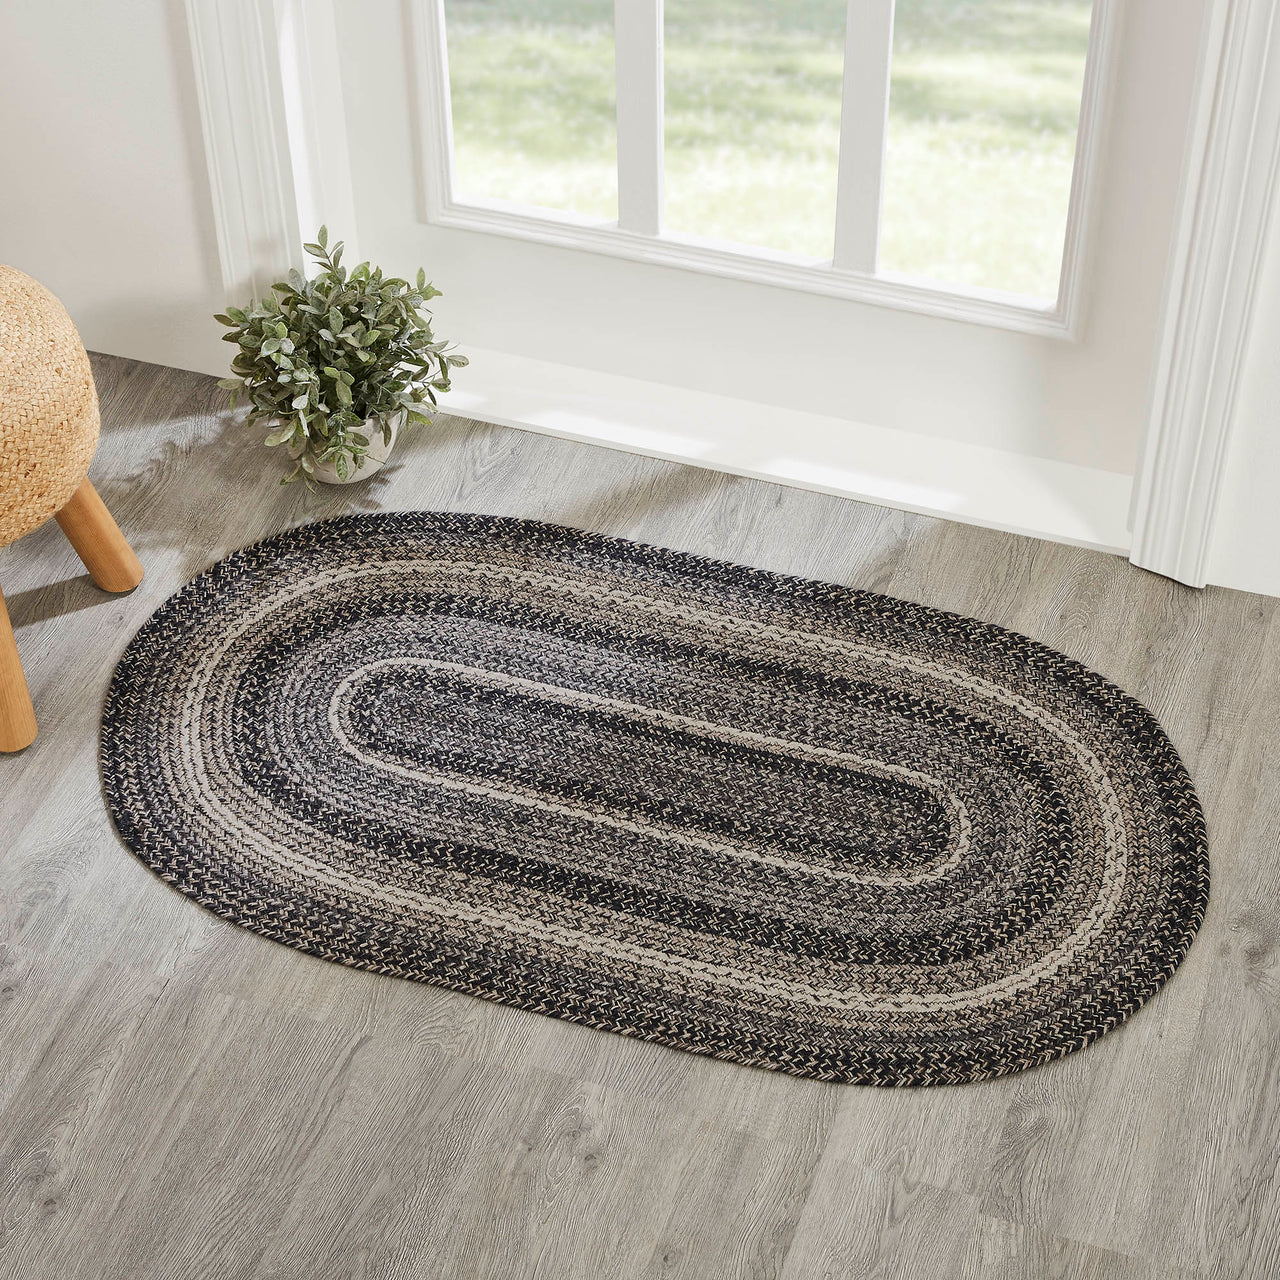 Sawyer Mill Black White Jute Braided Oval Rug with Rug Pad 27x48" VHC Brands